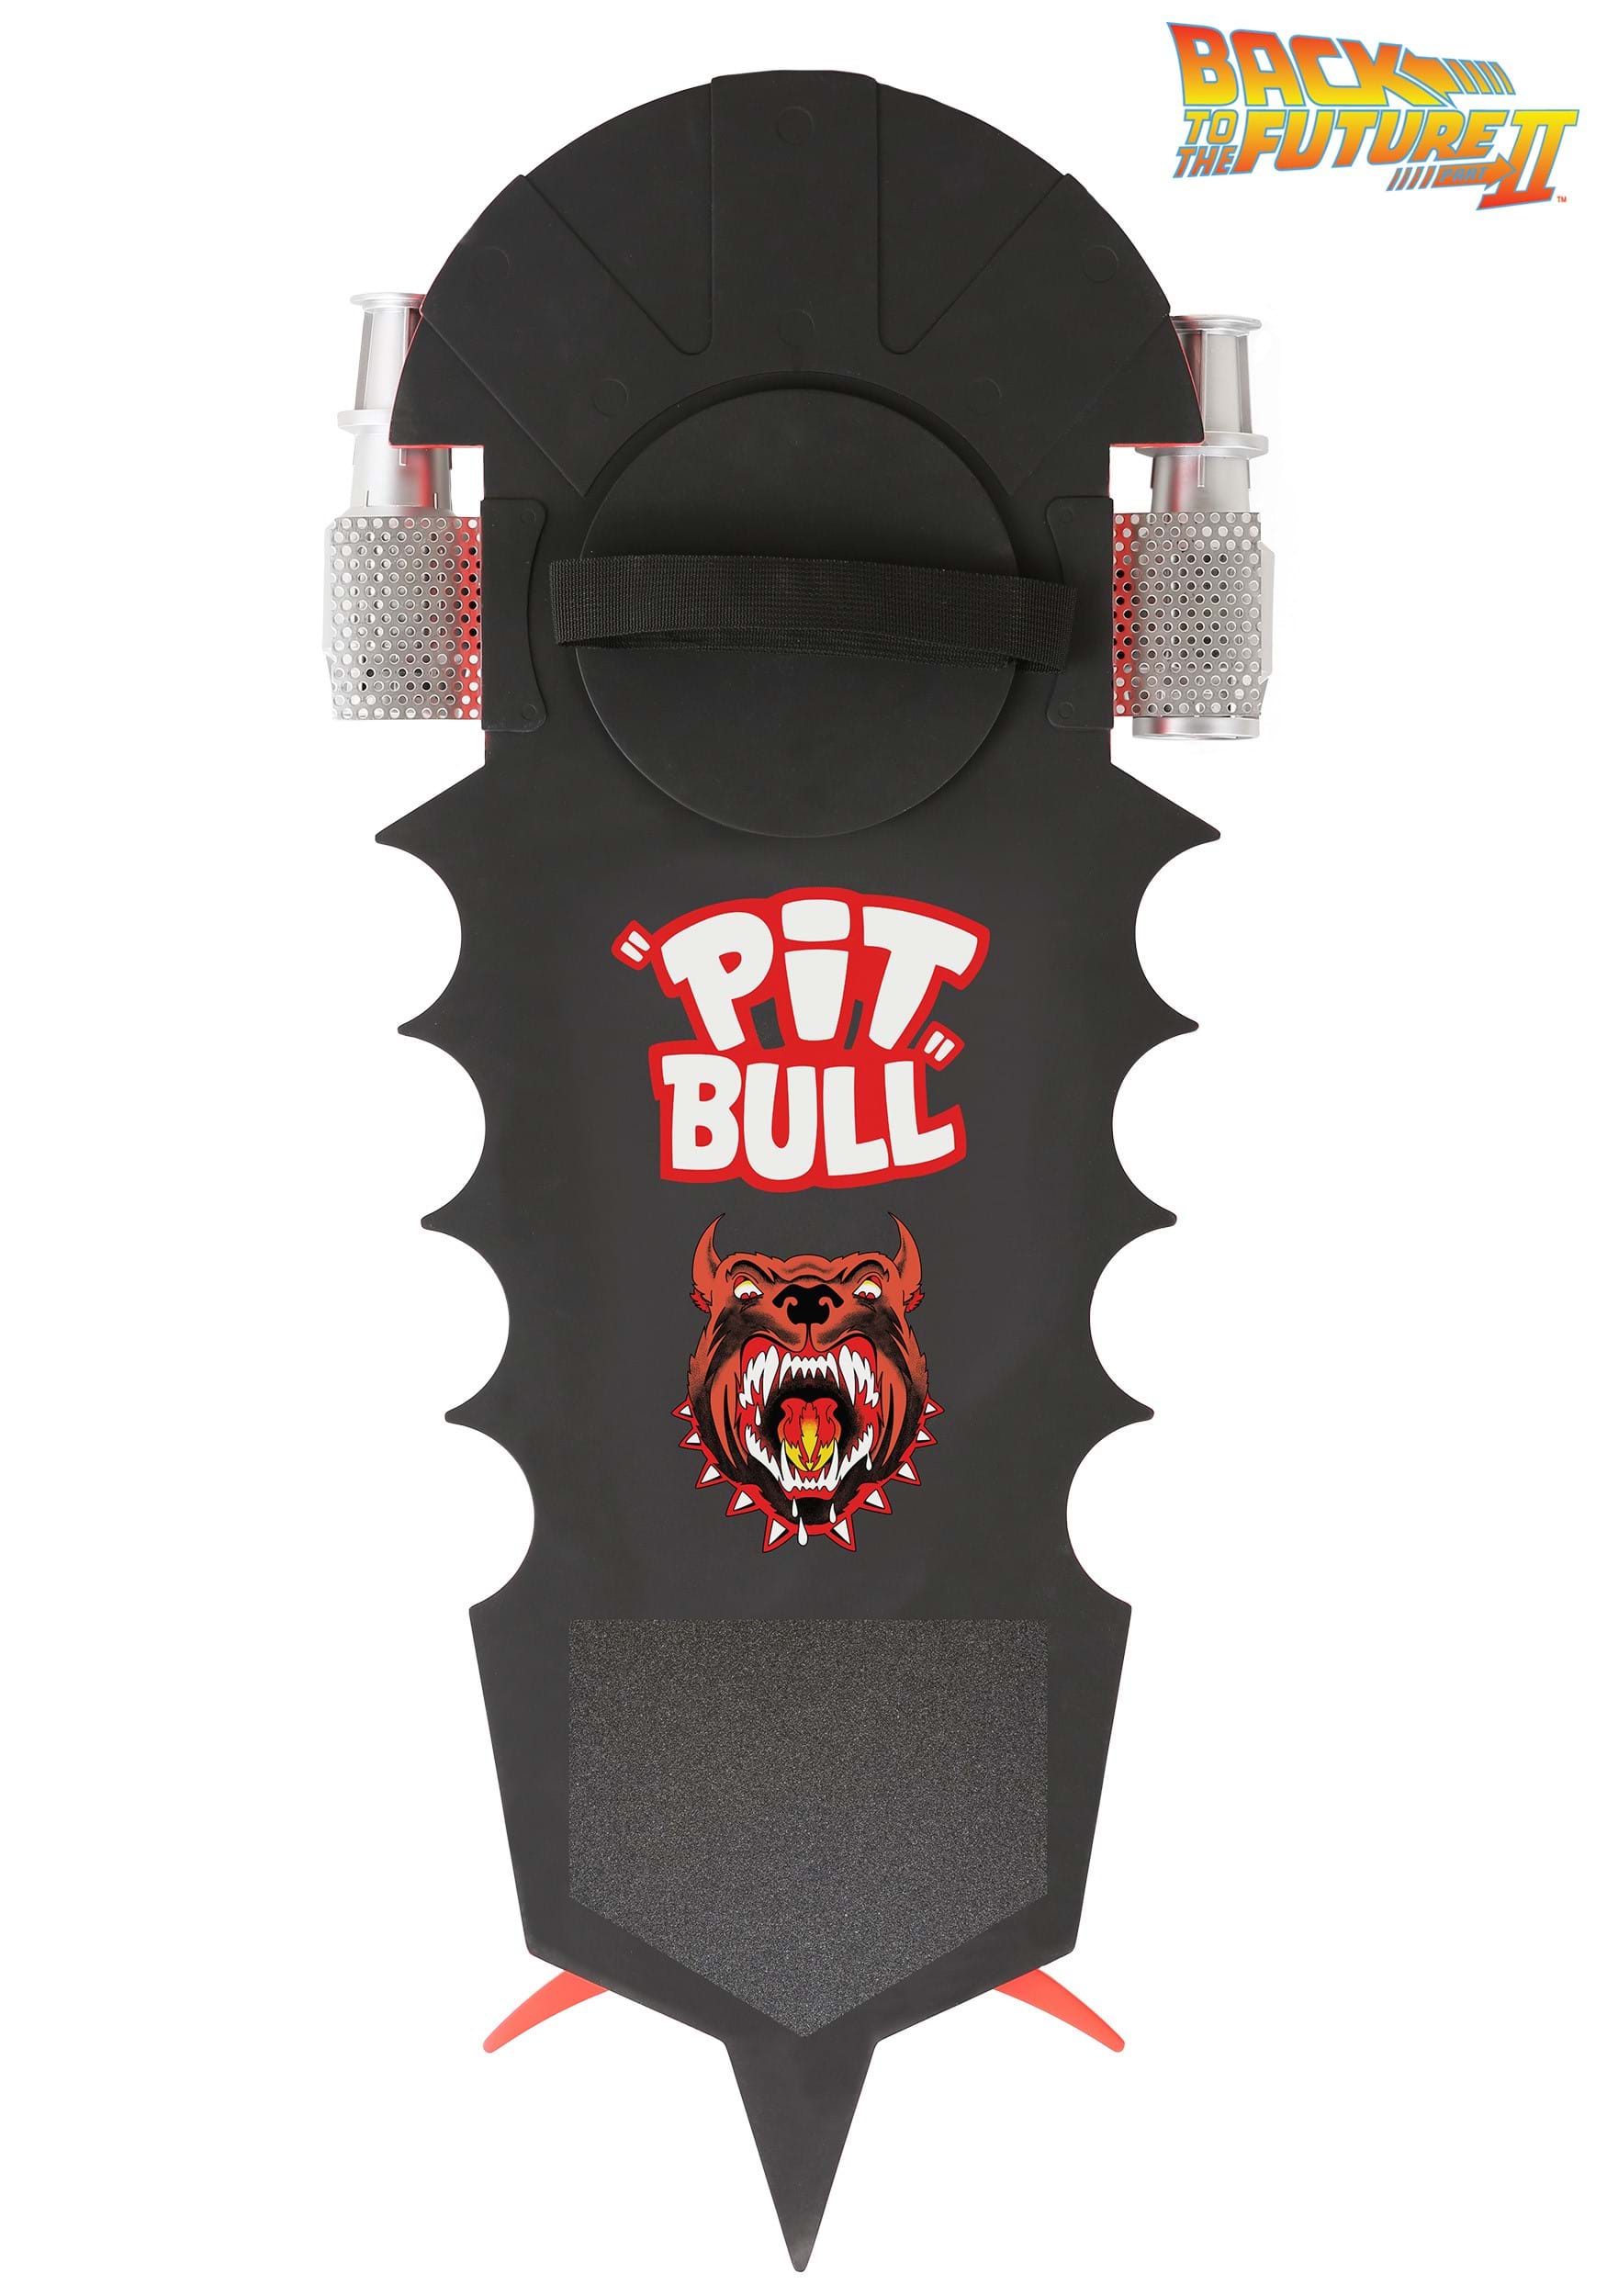 Pitbull Hoverboard Back to the Future II